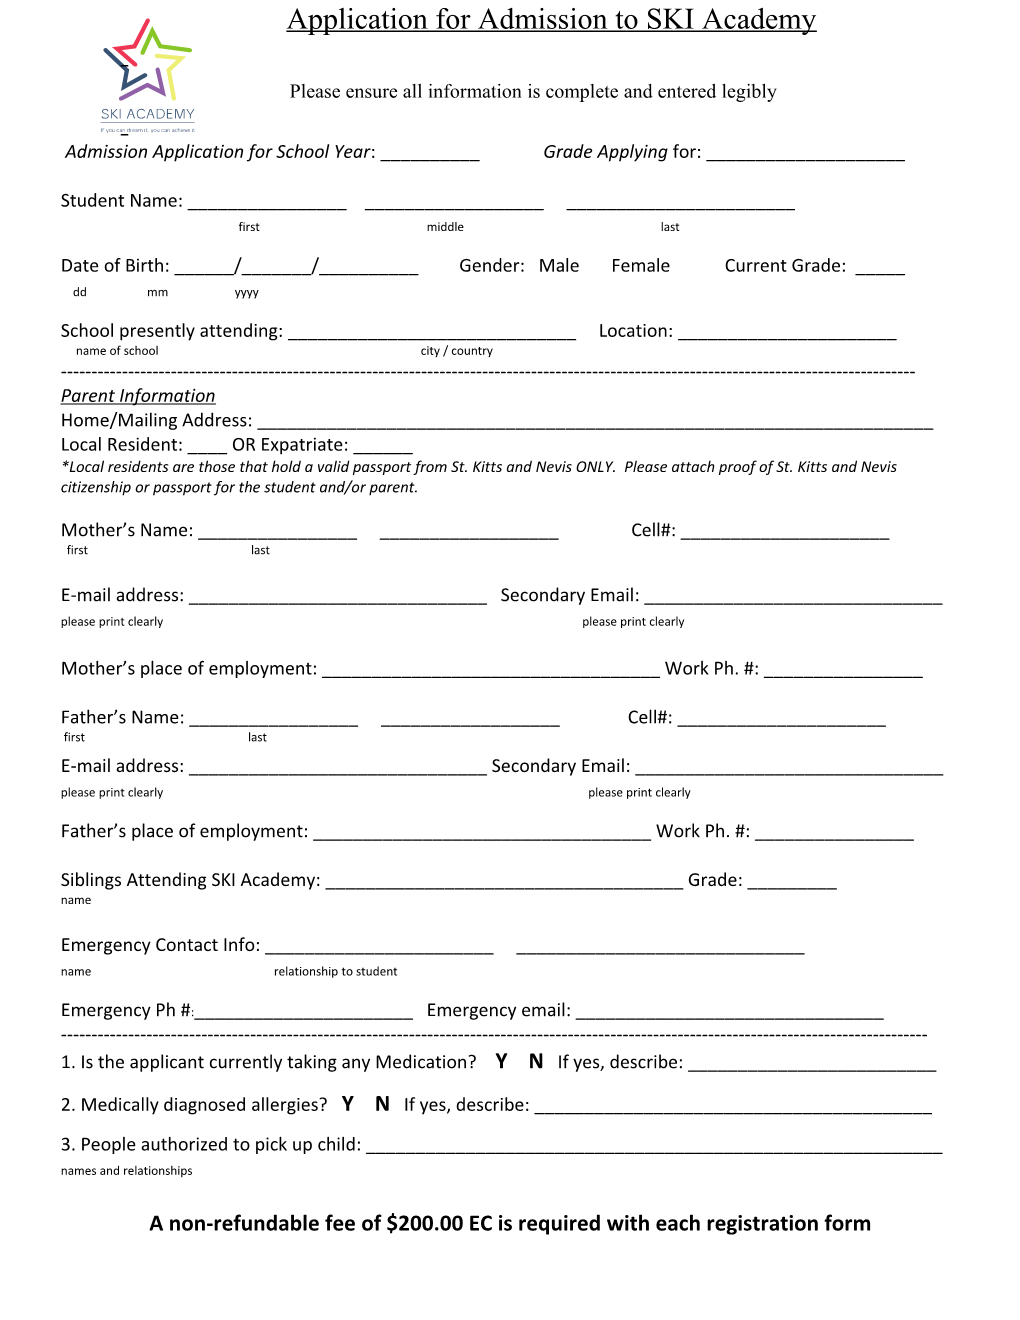 Application for Admission to SKI Academy